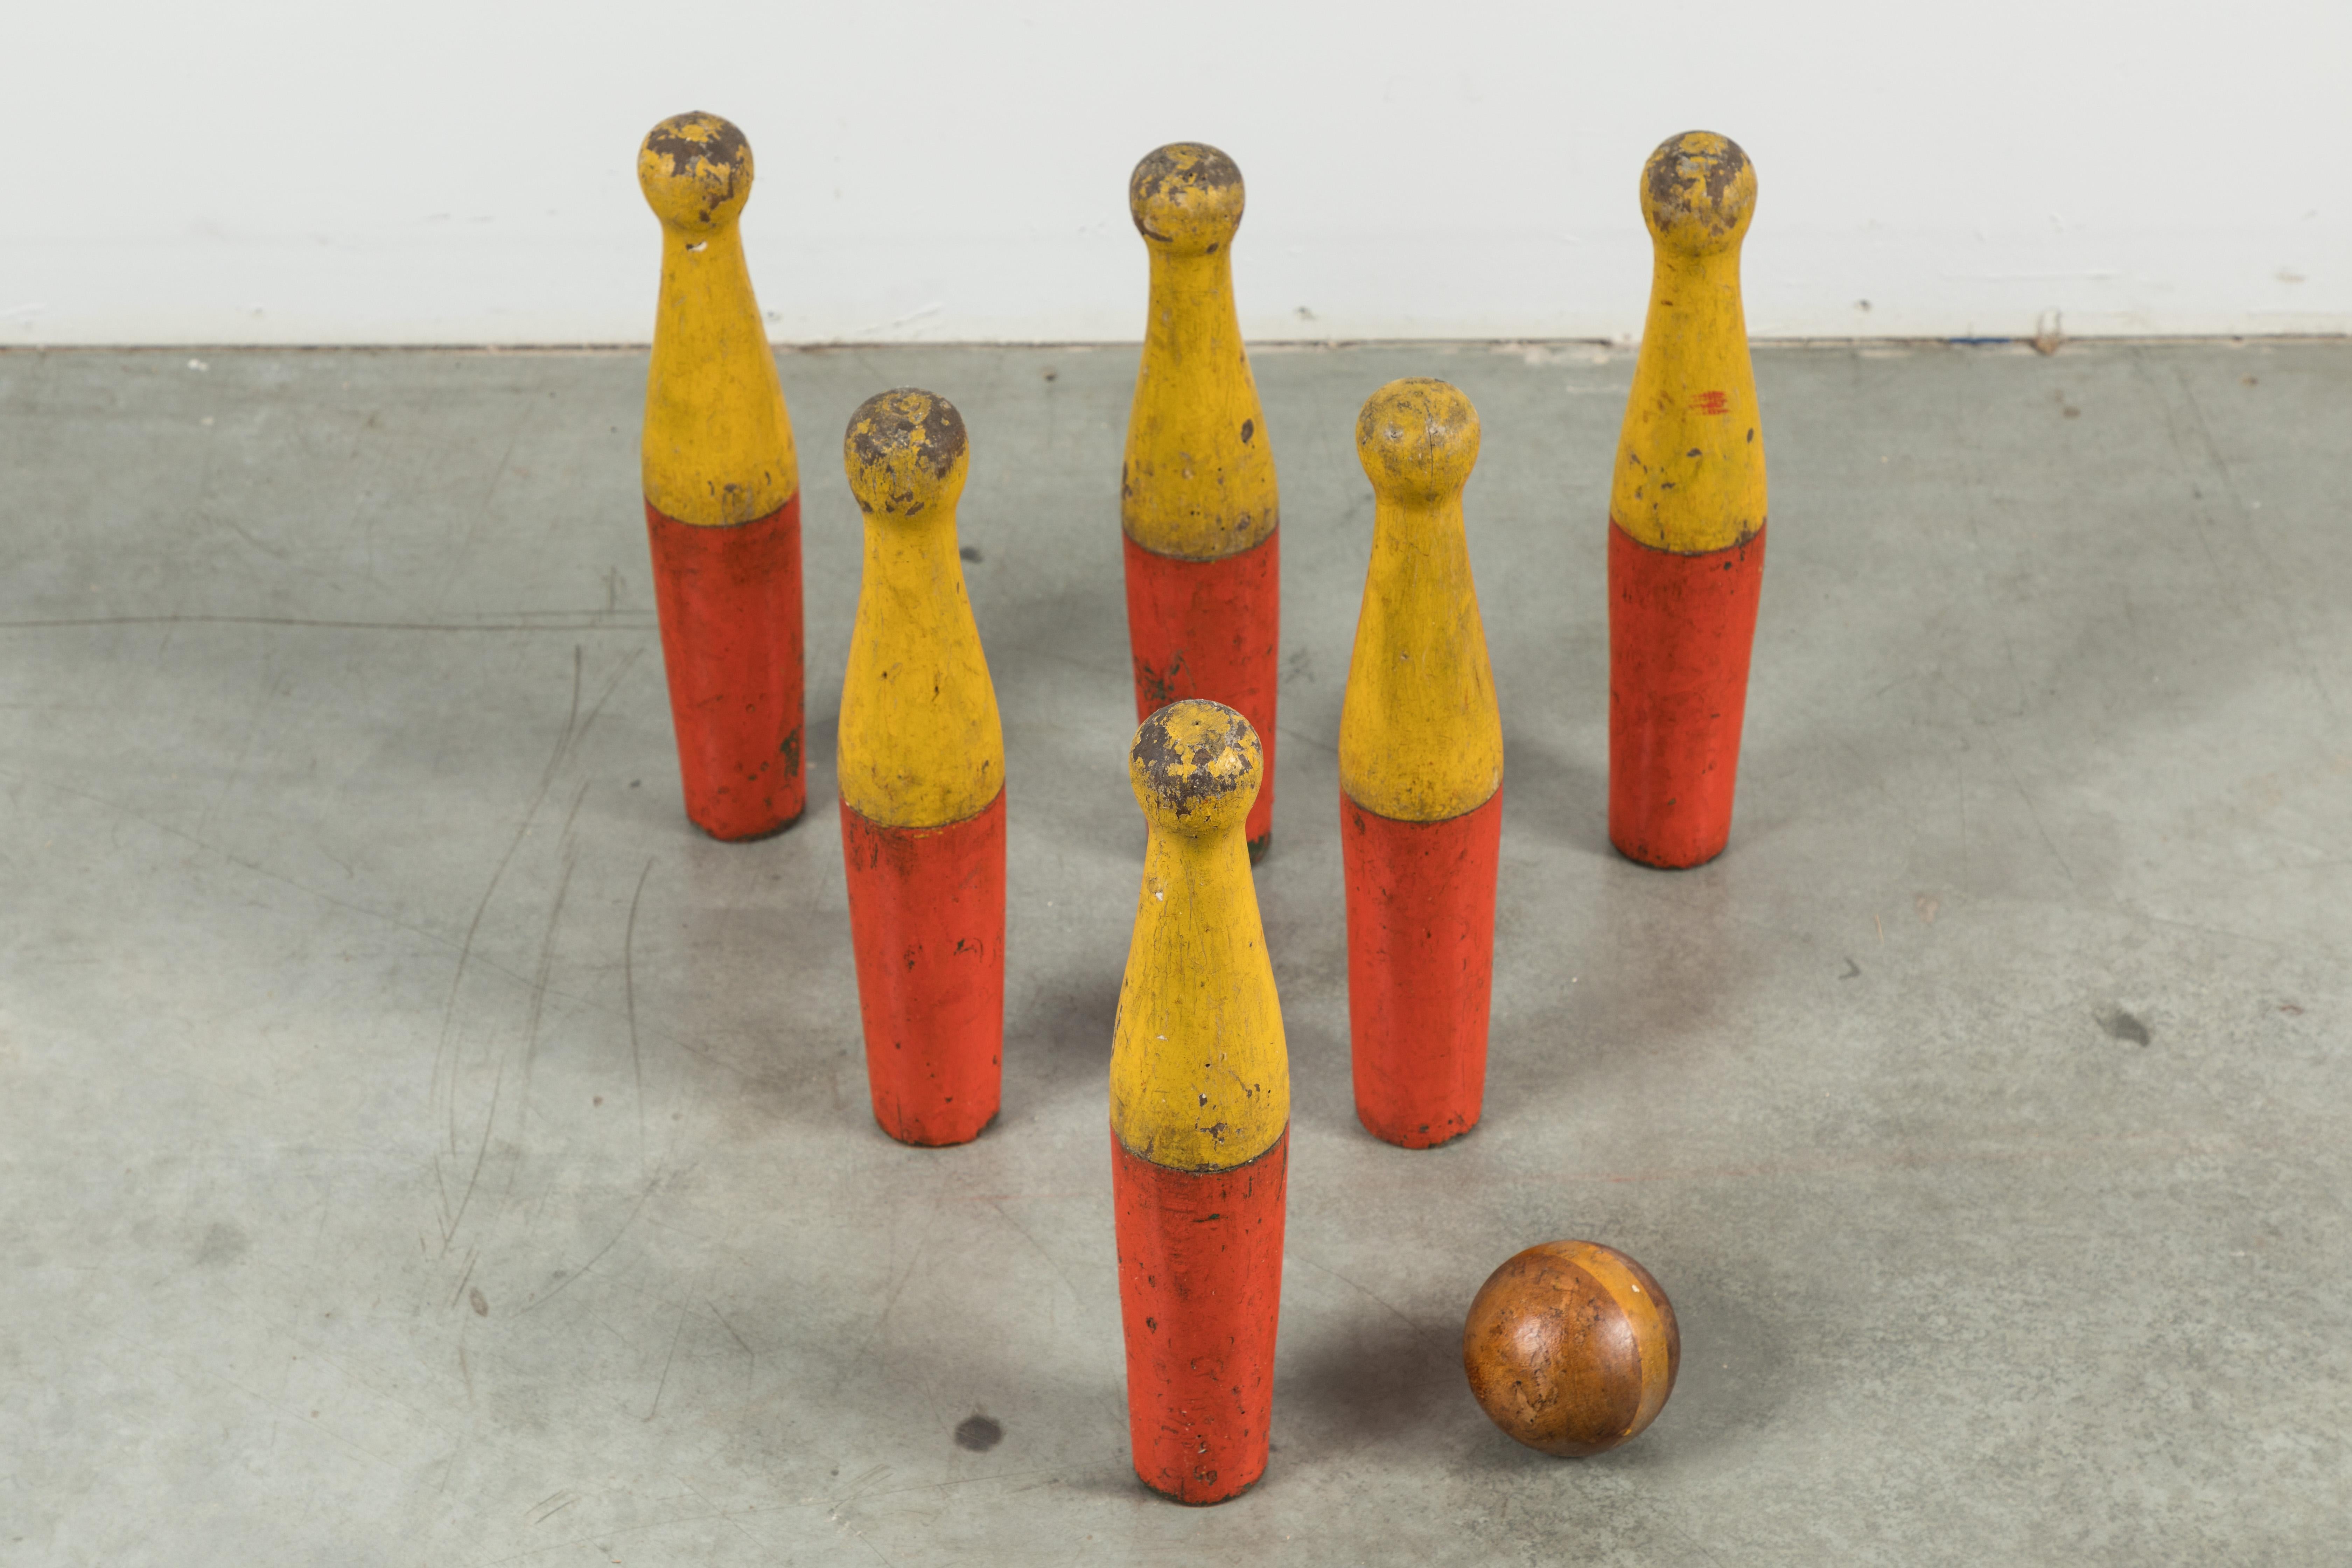 North American Wood Lawn Bowling Game Original Caddy and Bowling Balls, circa 1900 For Sale